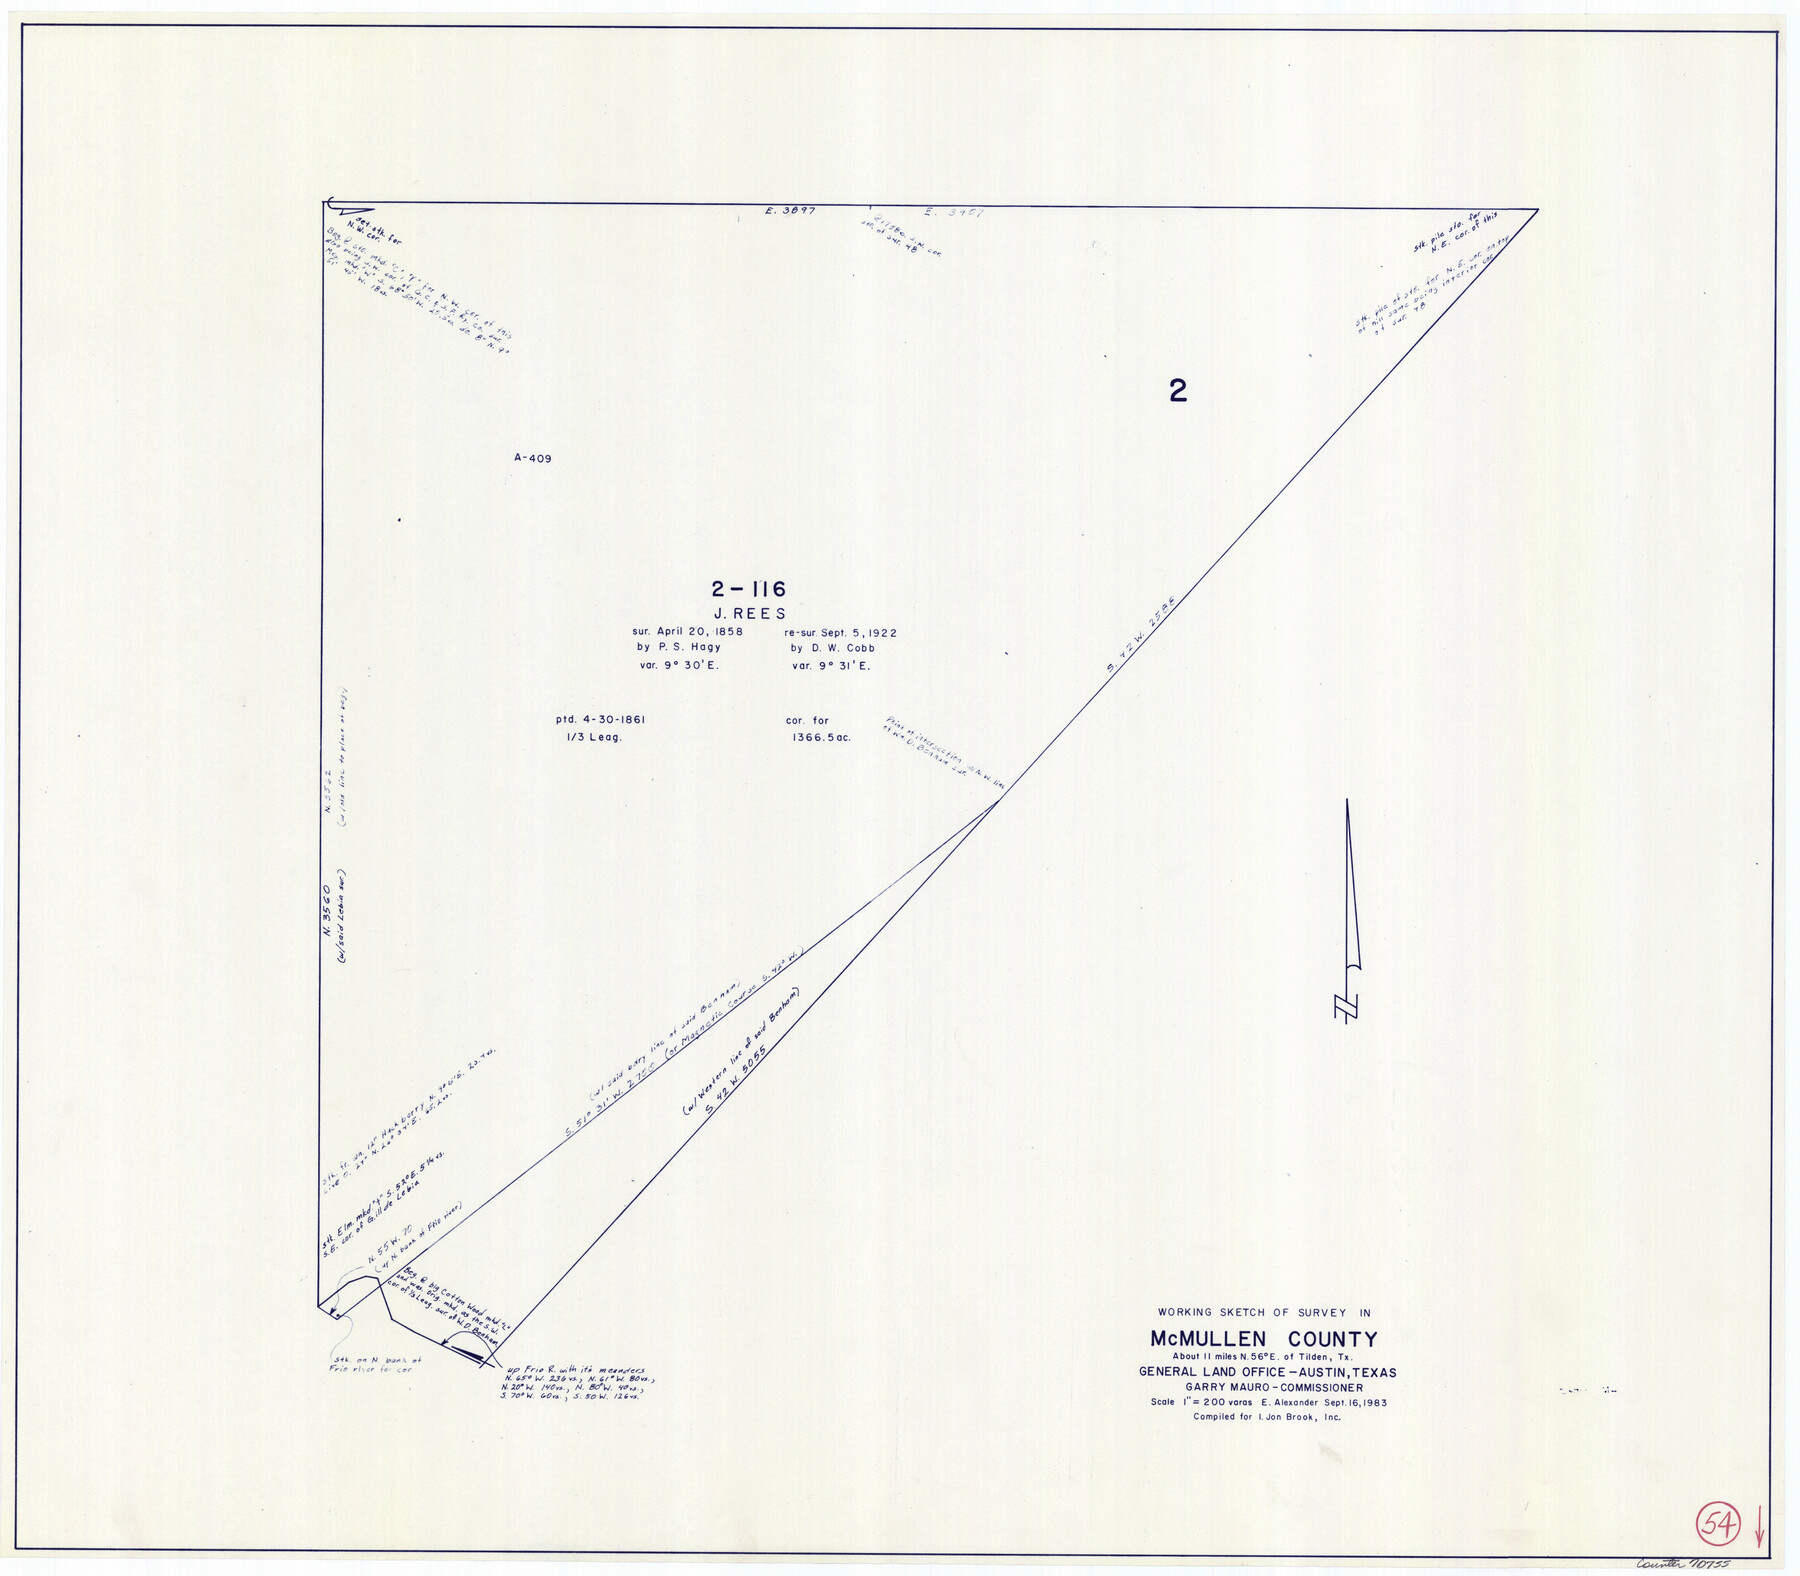 70755, McMullen County Working Sketch 54, General Map Collection